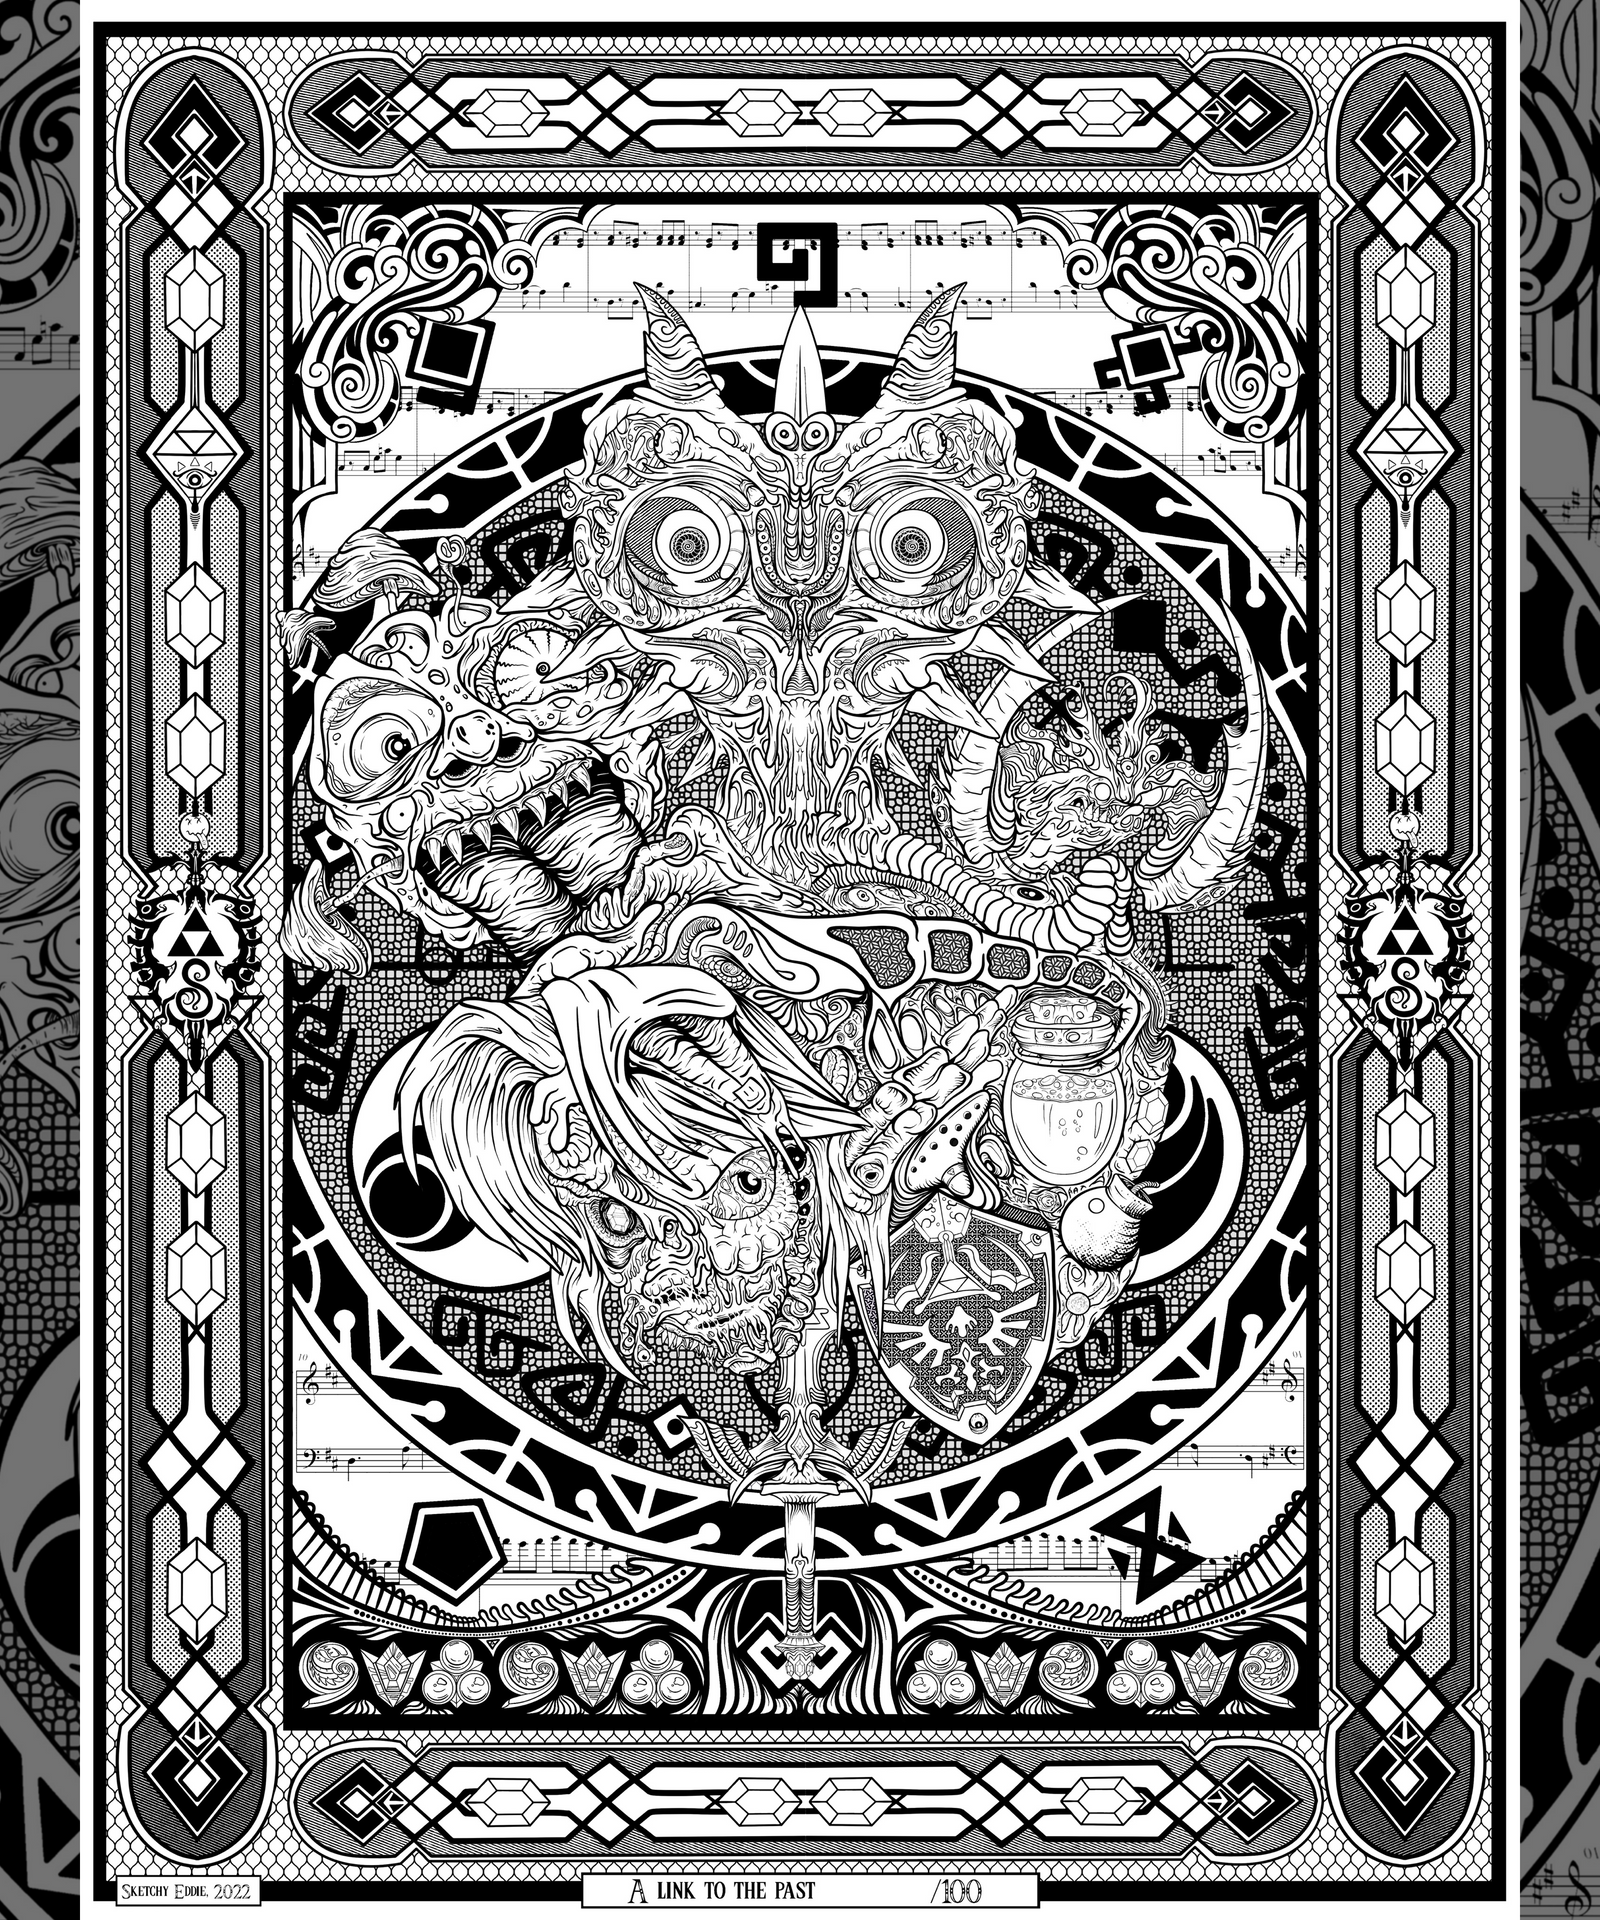 Limited Edition “A Link To The Past” OG Ink Poster/ Coloring Page